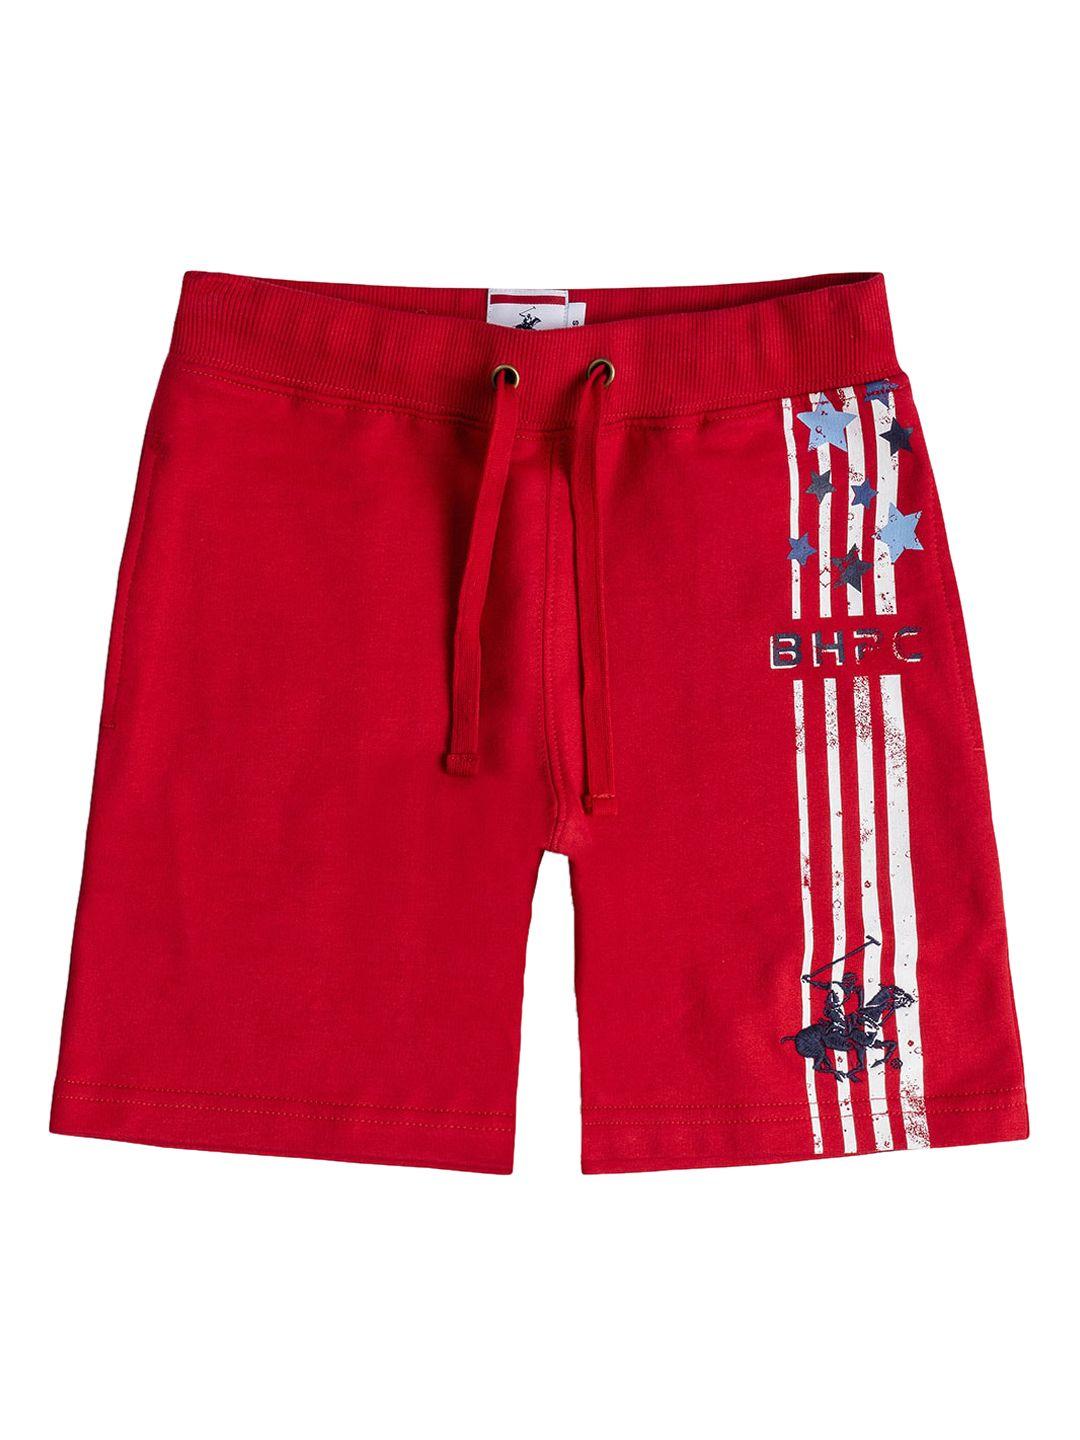 beverly hills polo club boys red shorts